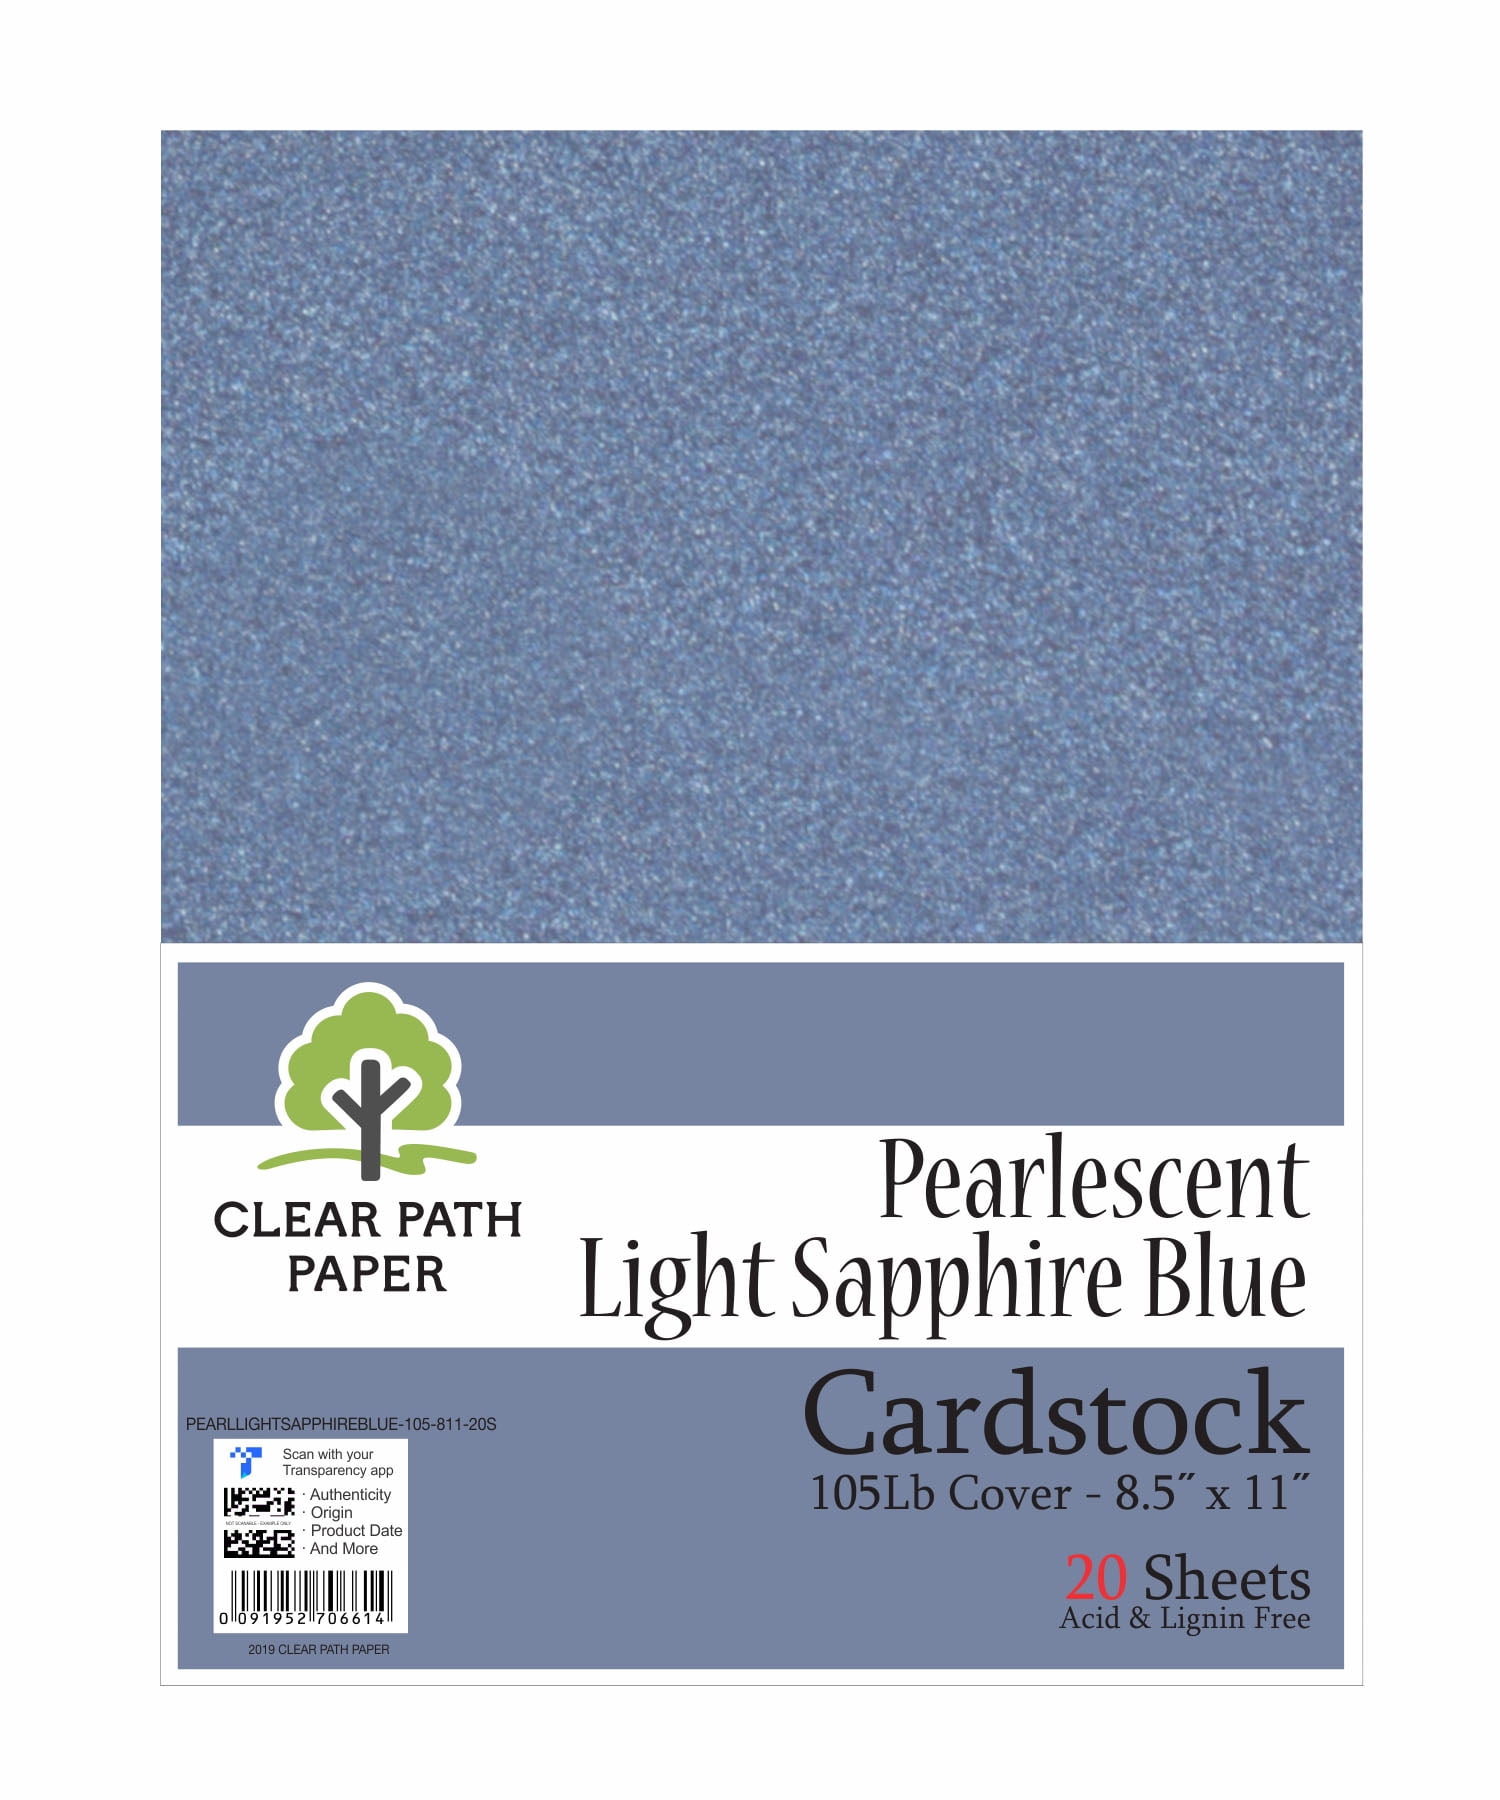  Cherry Red Cardstock - 8.5 x 11 inch - 65Lb Cover - 50 Sheets  - Clear Path Paper : Office Products